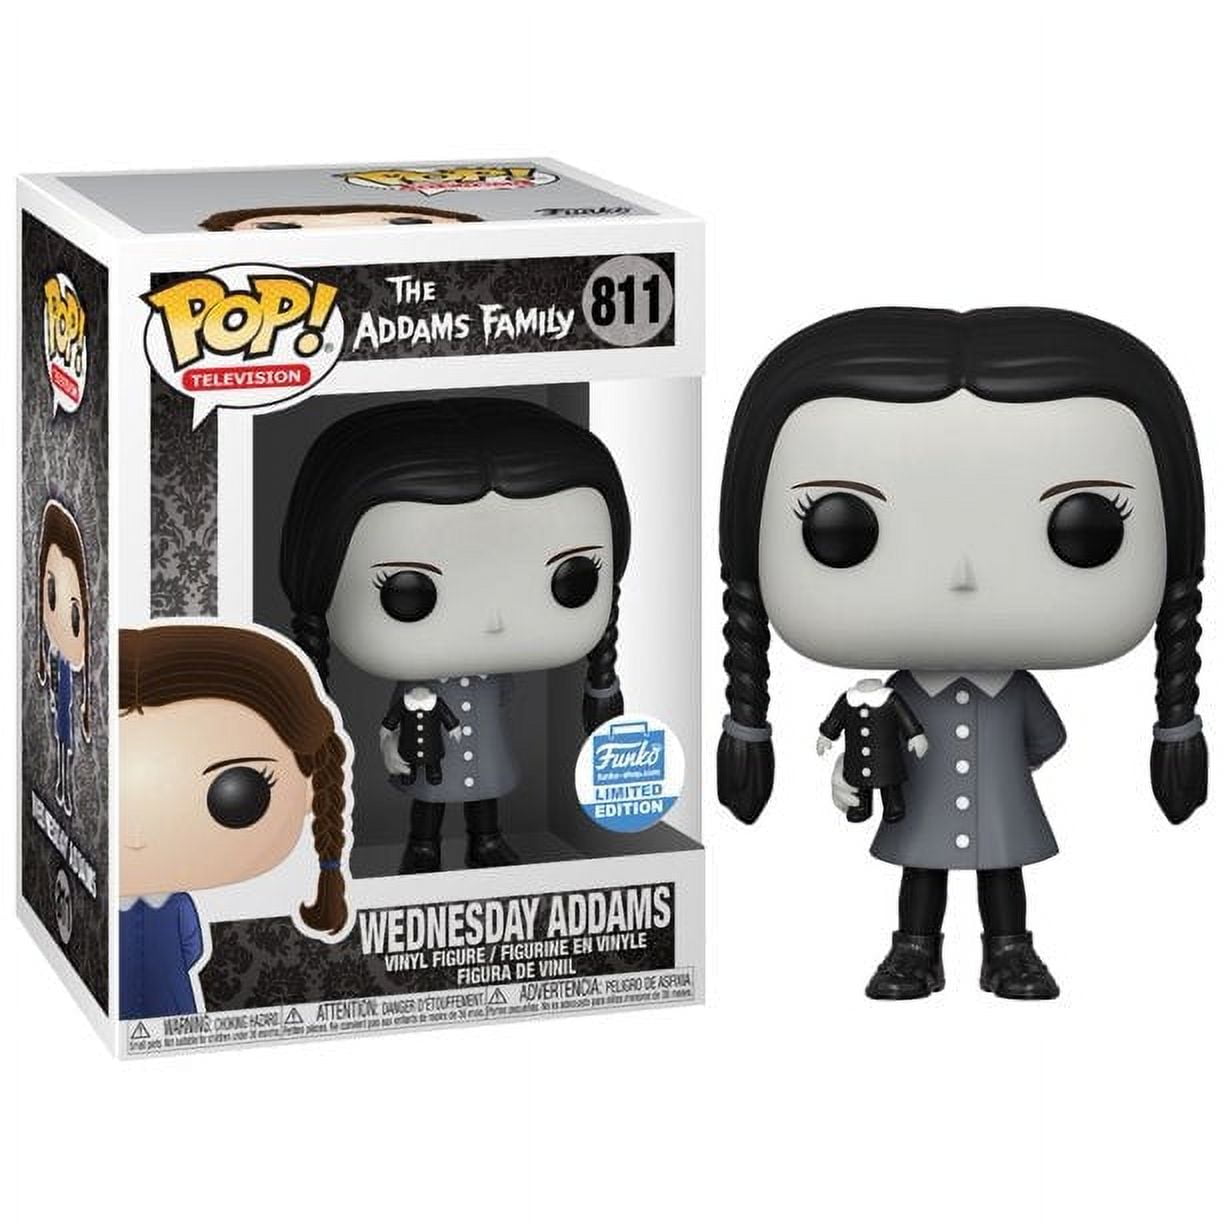 Funko The Addams Family POP! Movies Wednesday Addams Exclusive Vinyl Figure  #811 [Black & White] 